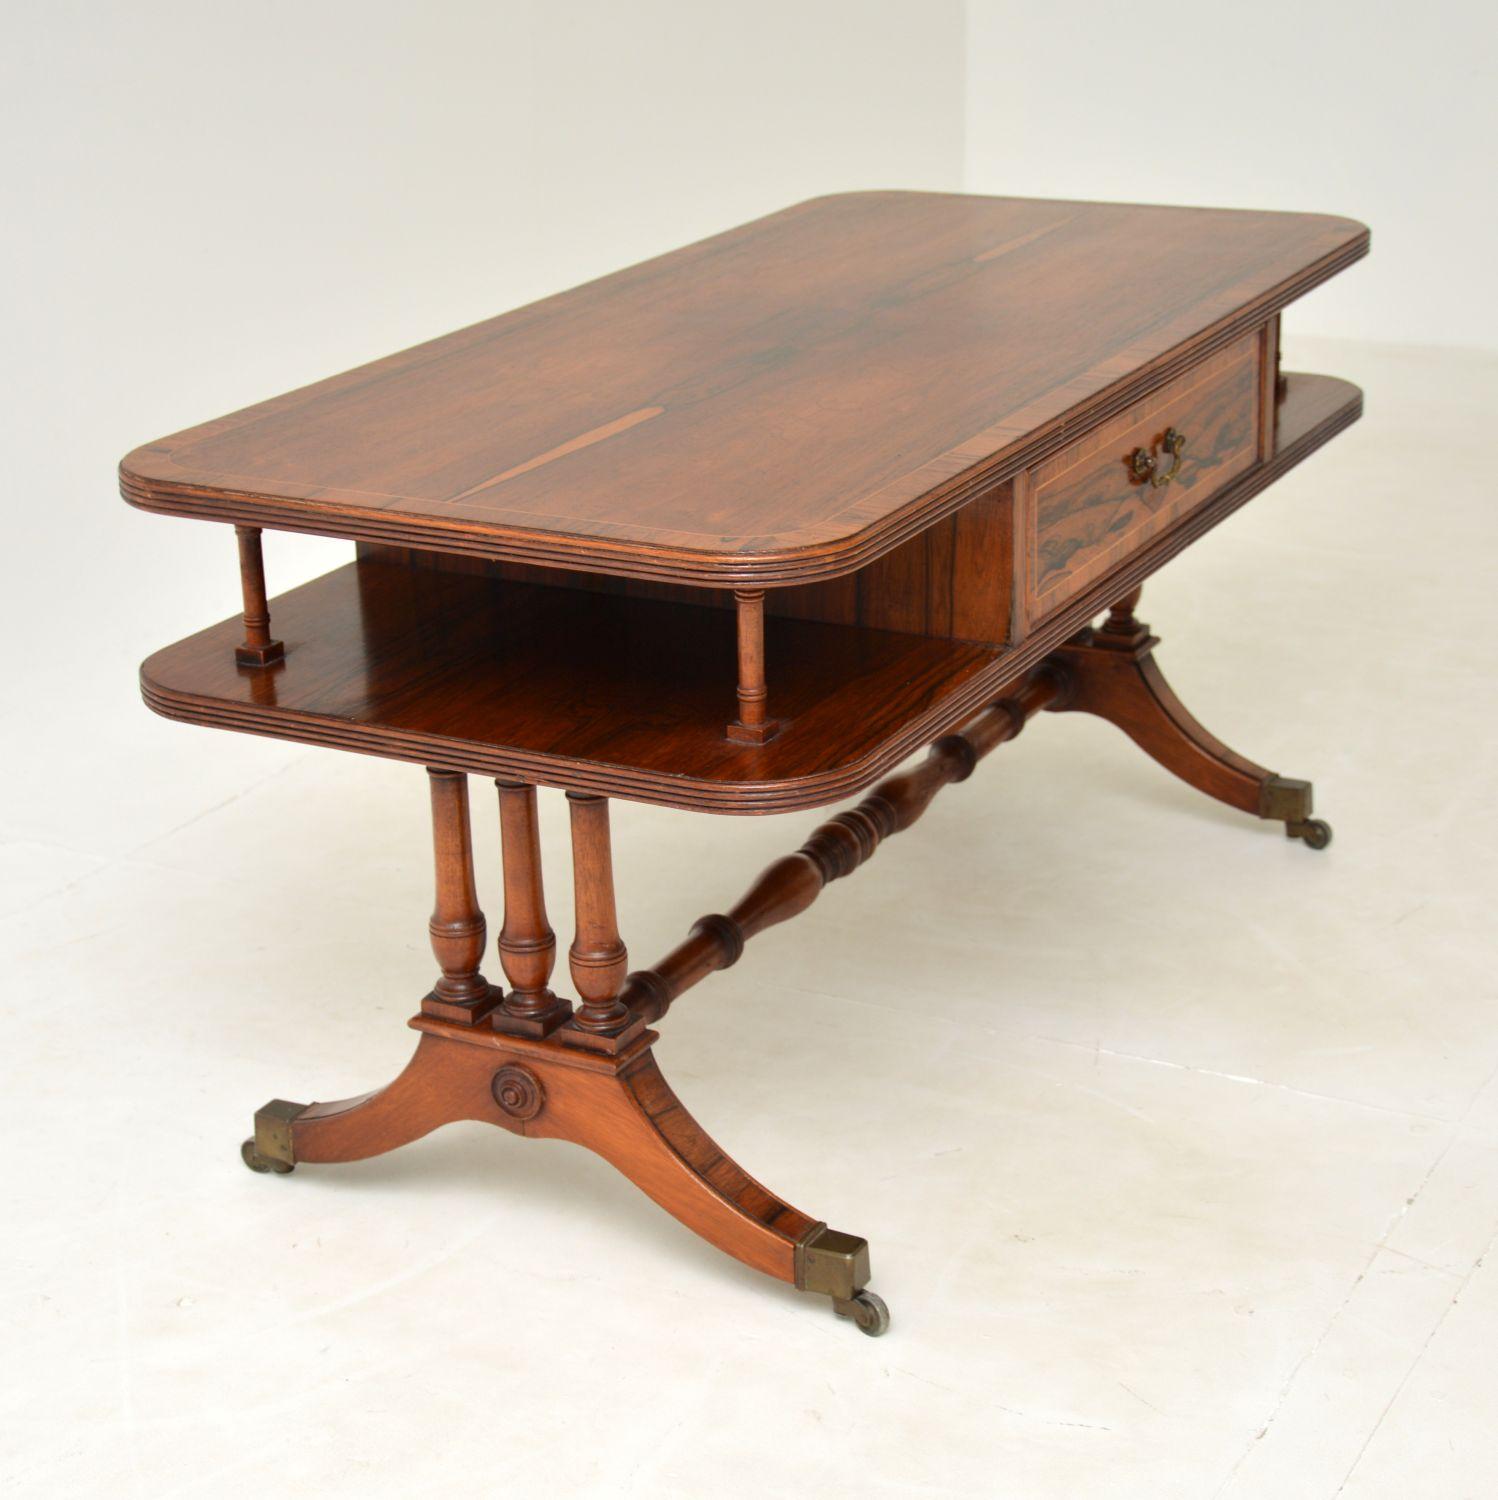 English Antique Regency Style Inlaid Coffee Table